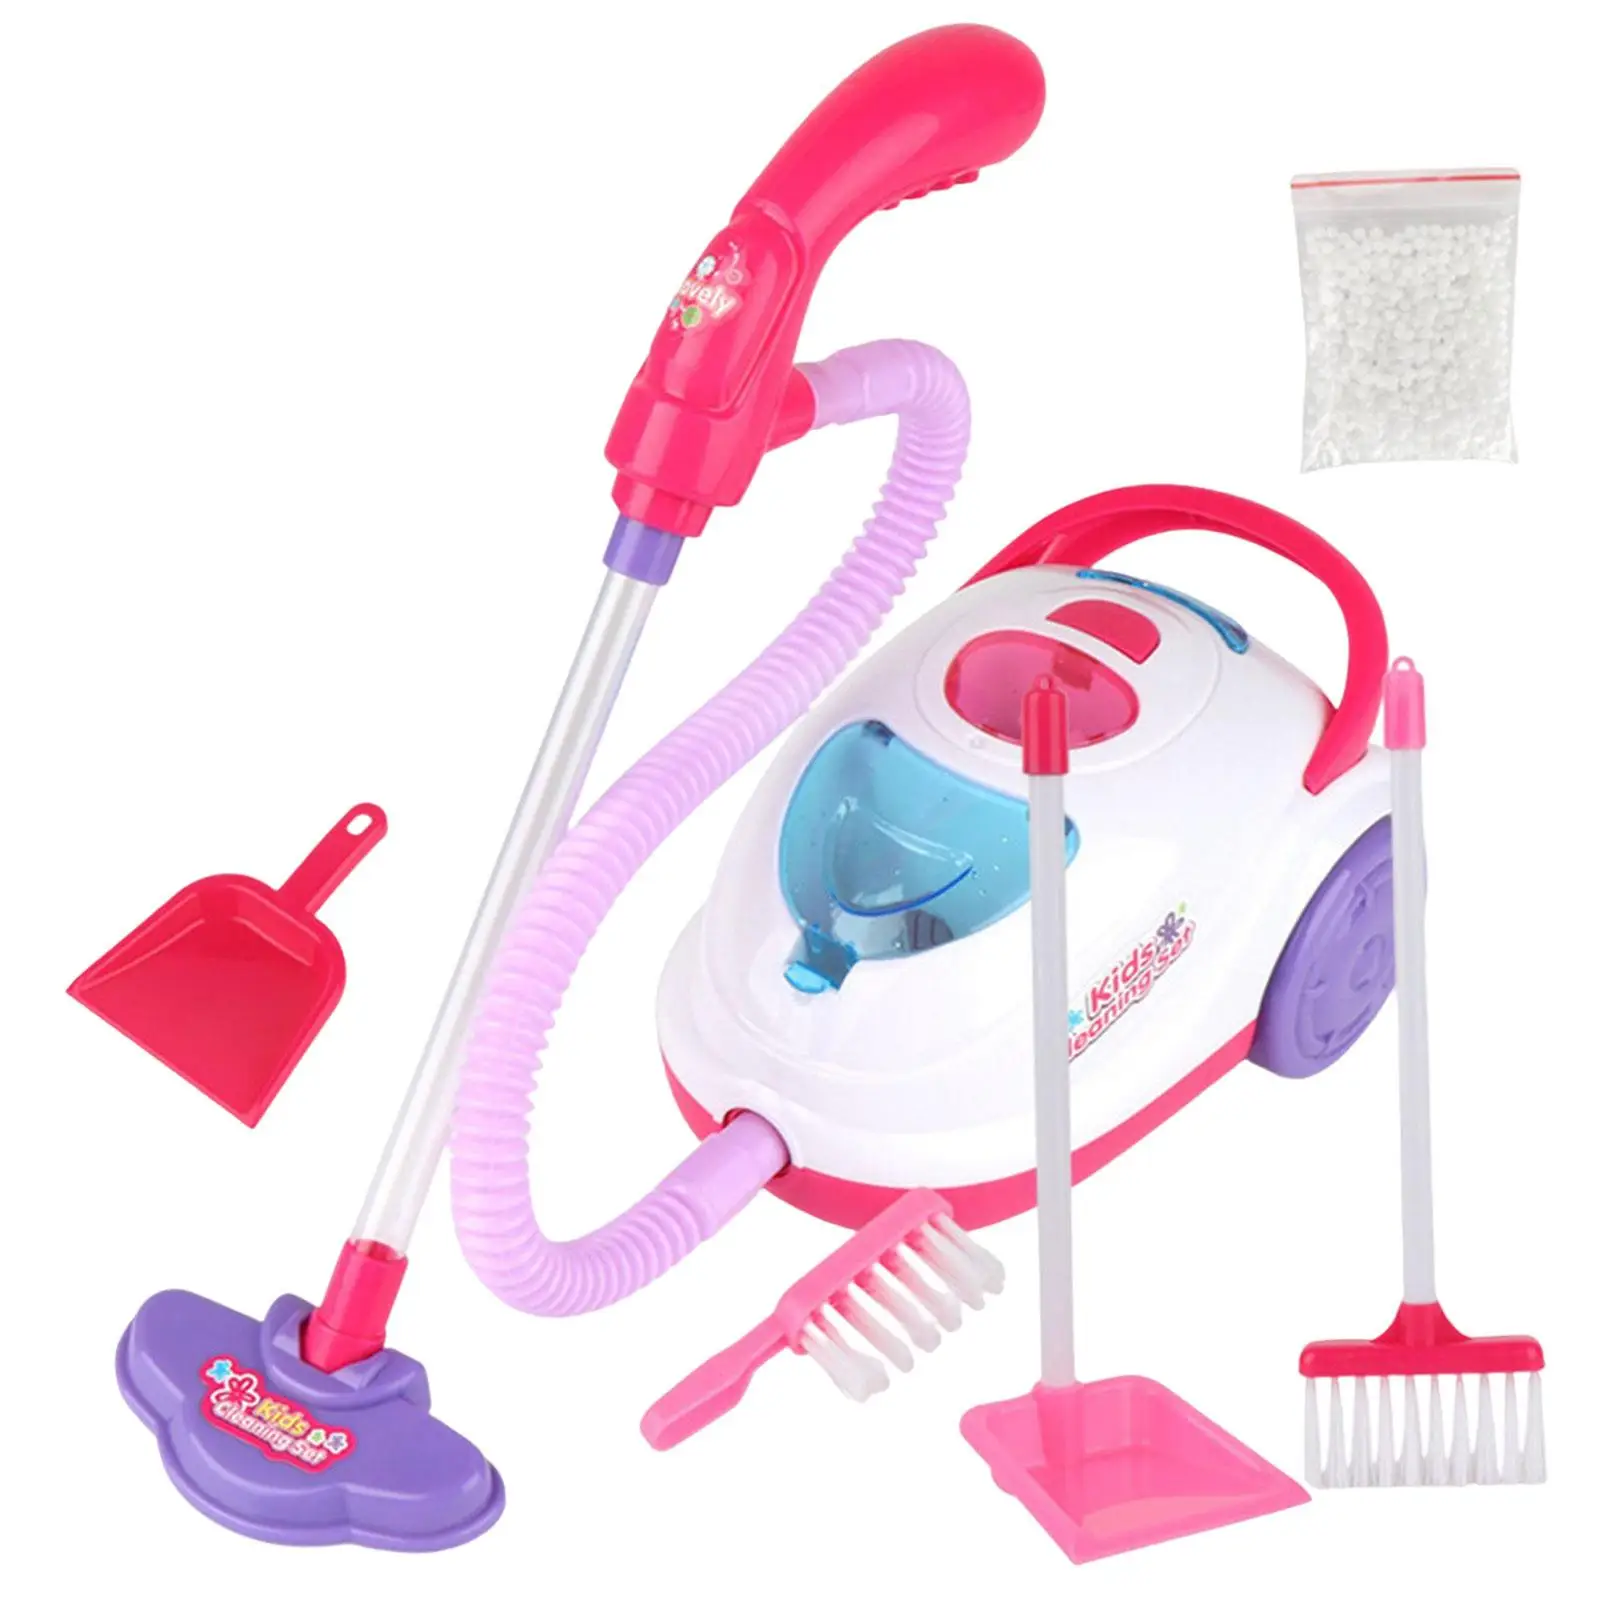 Pink Mini Vacuum Cleaner Cleaning Set,Housekeeping Parent Child Game,Playing Learning Toys ,Role Play for Ages 3 4 5 6 Toddlers